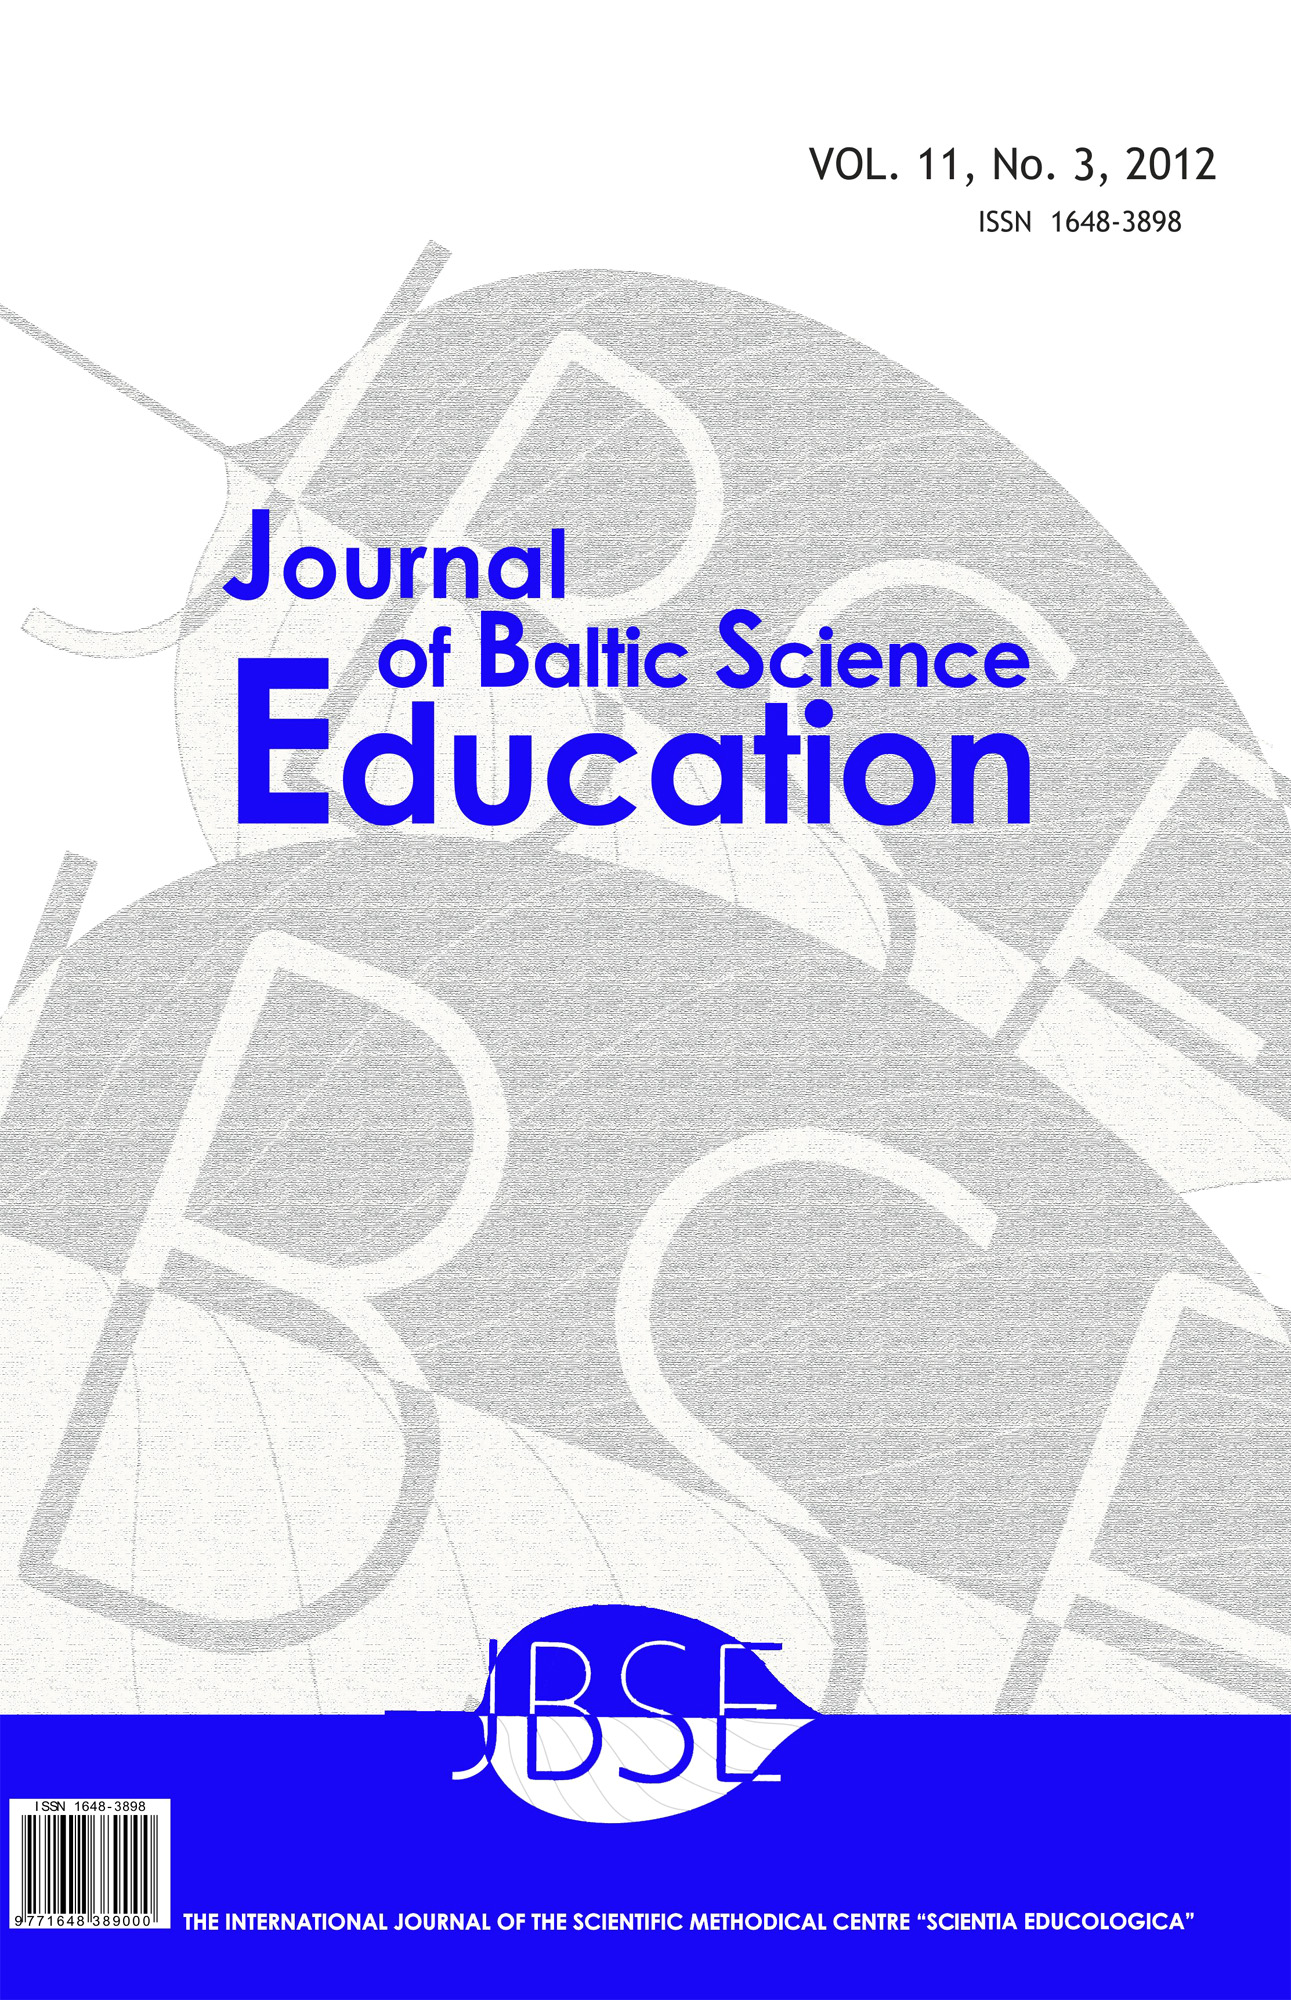 LEVERAGING EDUCATIONAL PATHWAY TO BRIDGE IN-SCHOOL AND OUT-OF-SCHOOL SCIENCE LEARNING: A COMPARISON OF DIFFERENT INSTRUCTIONAL DESIGNS